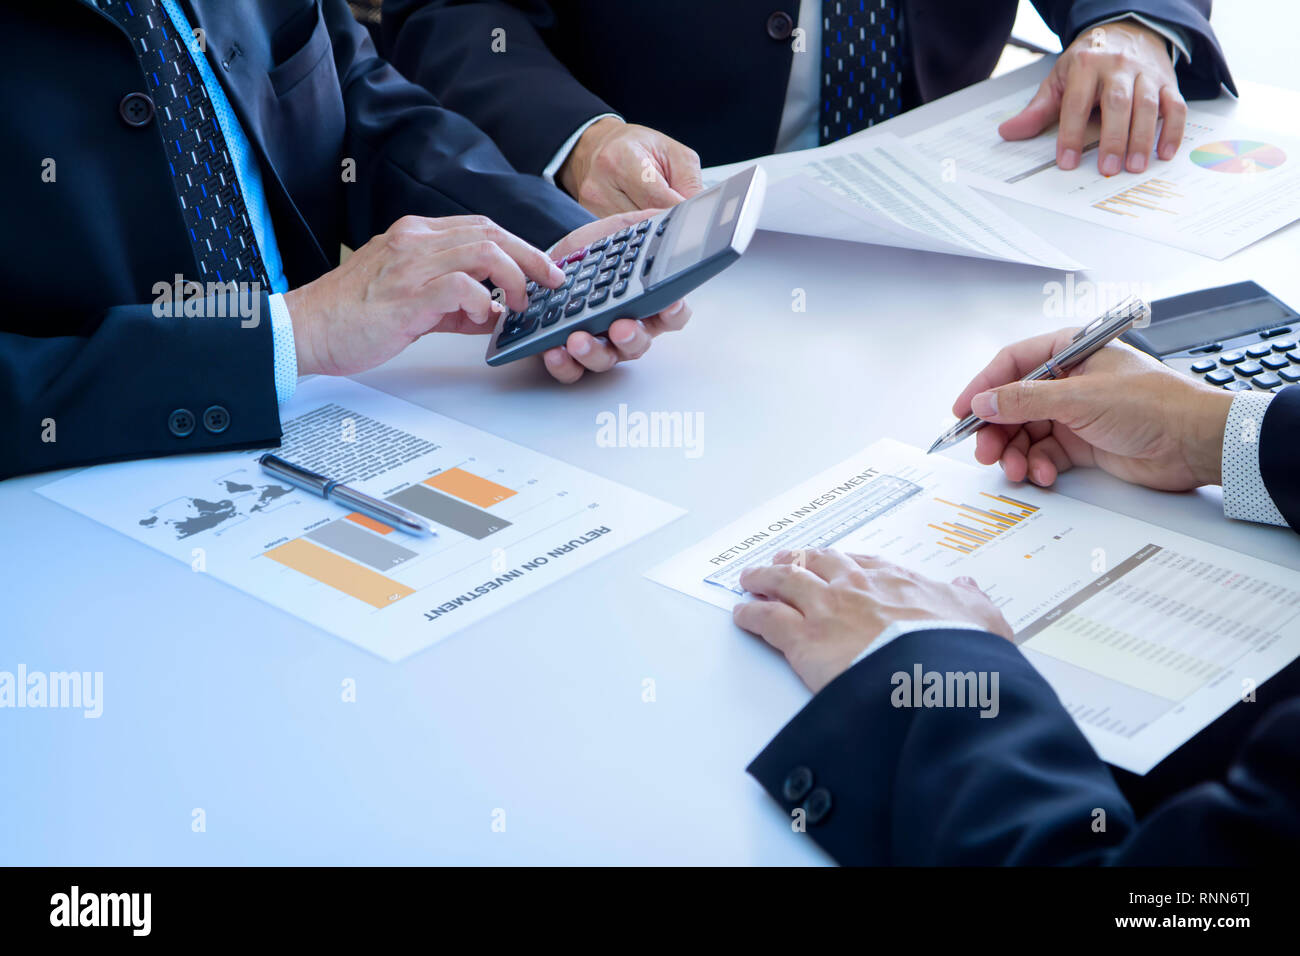 Businessmen are deeply reviewing a financial reports for a return on investment or investment risk analysis. Stock Photo